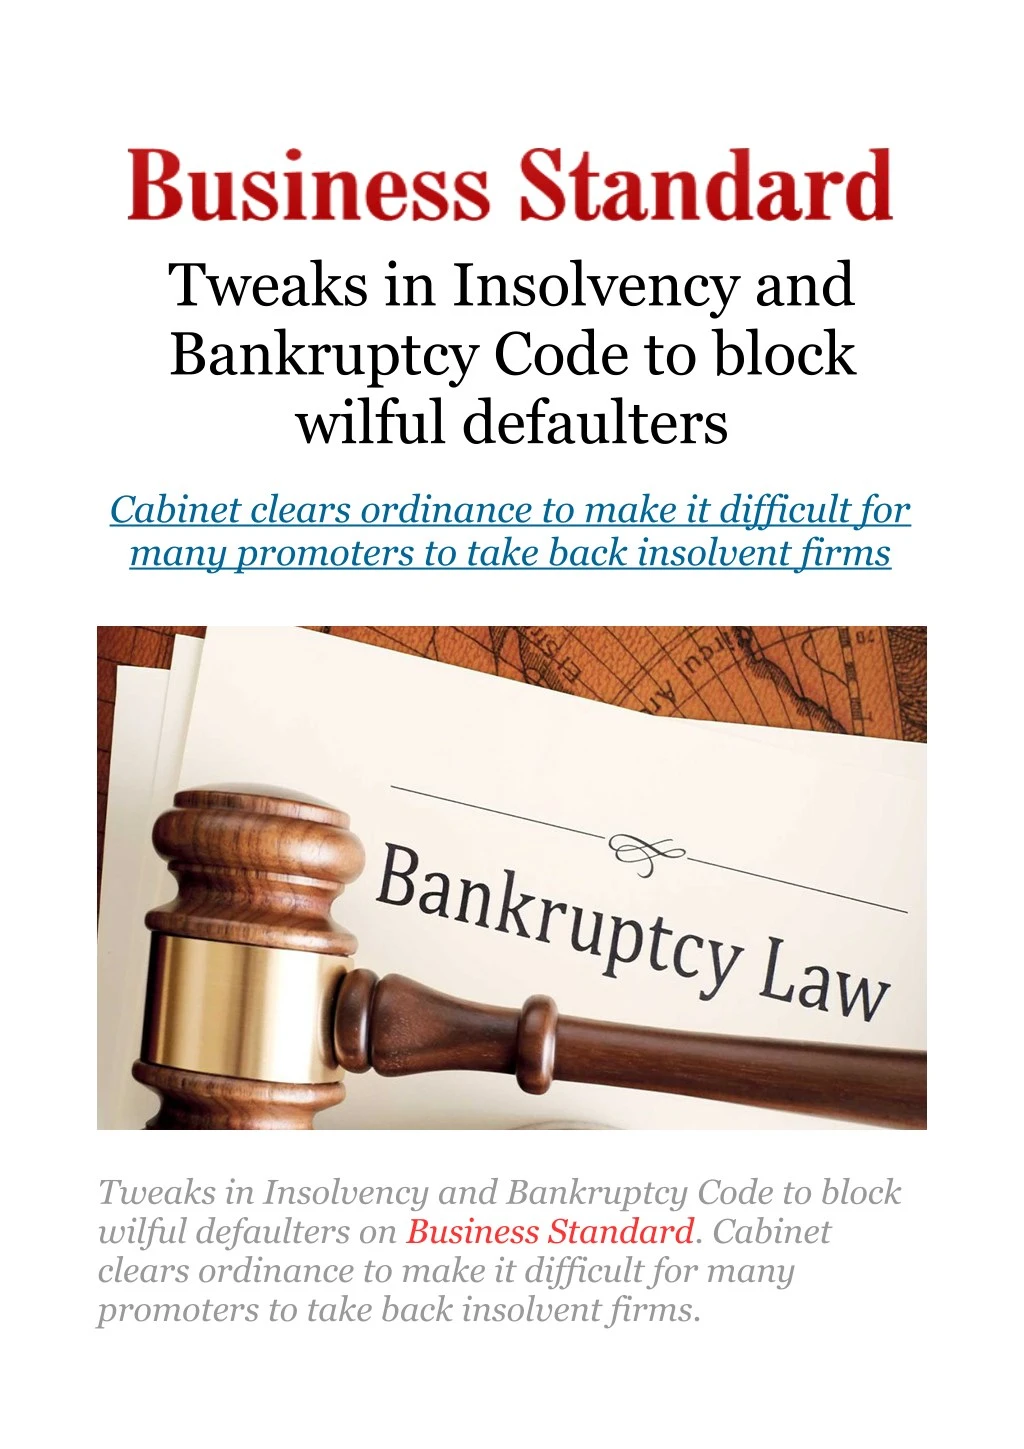 tweaks in insolvency and bankruptcy code to block